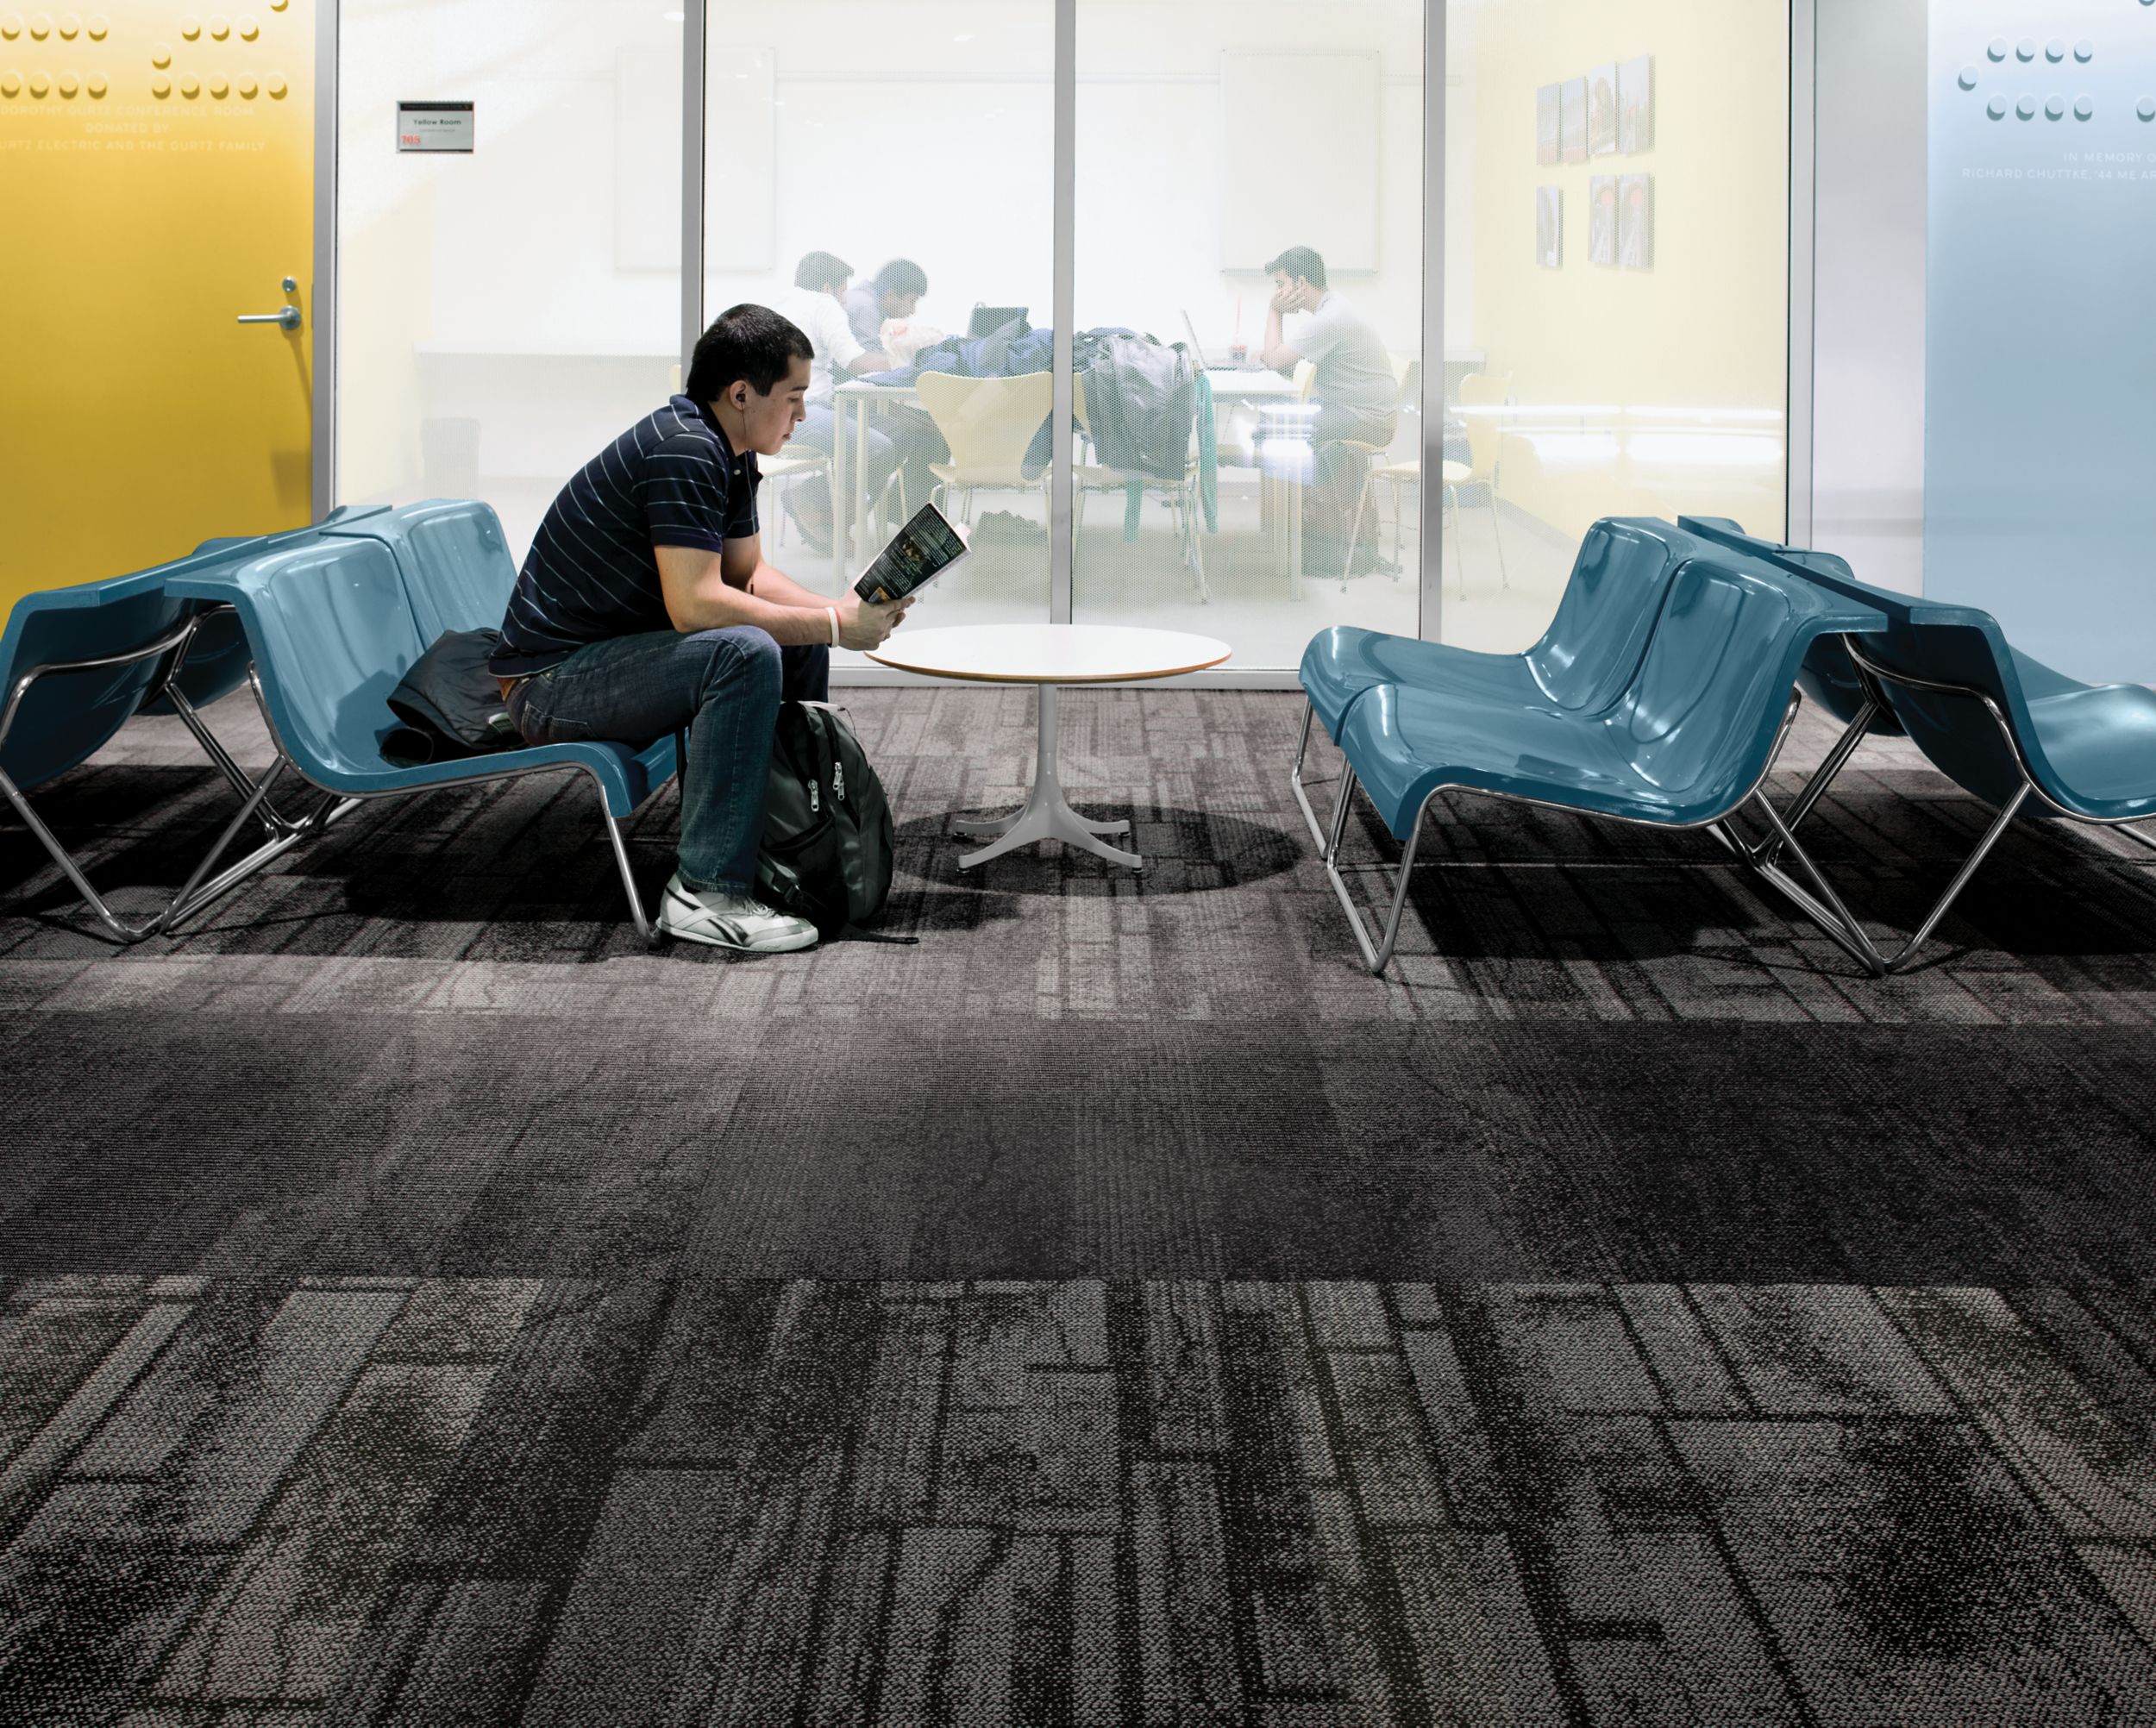 Interface Neighborhood Blocks and Neighborhood Smooth plank carpet tile in public education space with man reading a book on blue chair imagen número 6